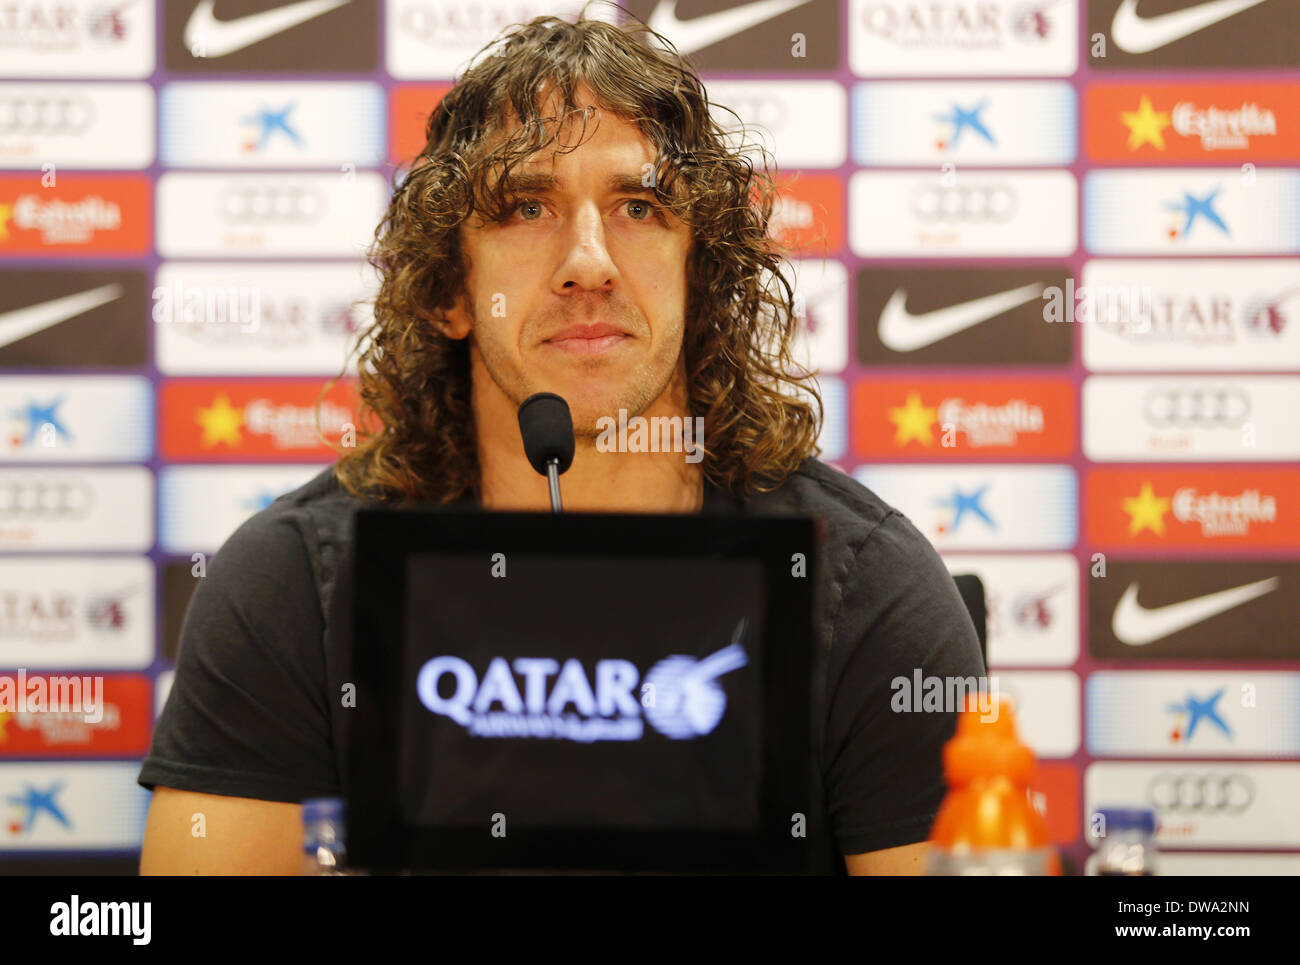 Barcelona, Spain. 4th Mar, 2014. Carles Puyol during a press conference announcing his retirement from football at the end of season. Credit:  Joan Valls/NurPhoto/ZUMAPRESS.com/Alamy Live News Stock Photo